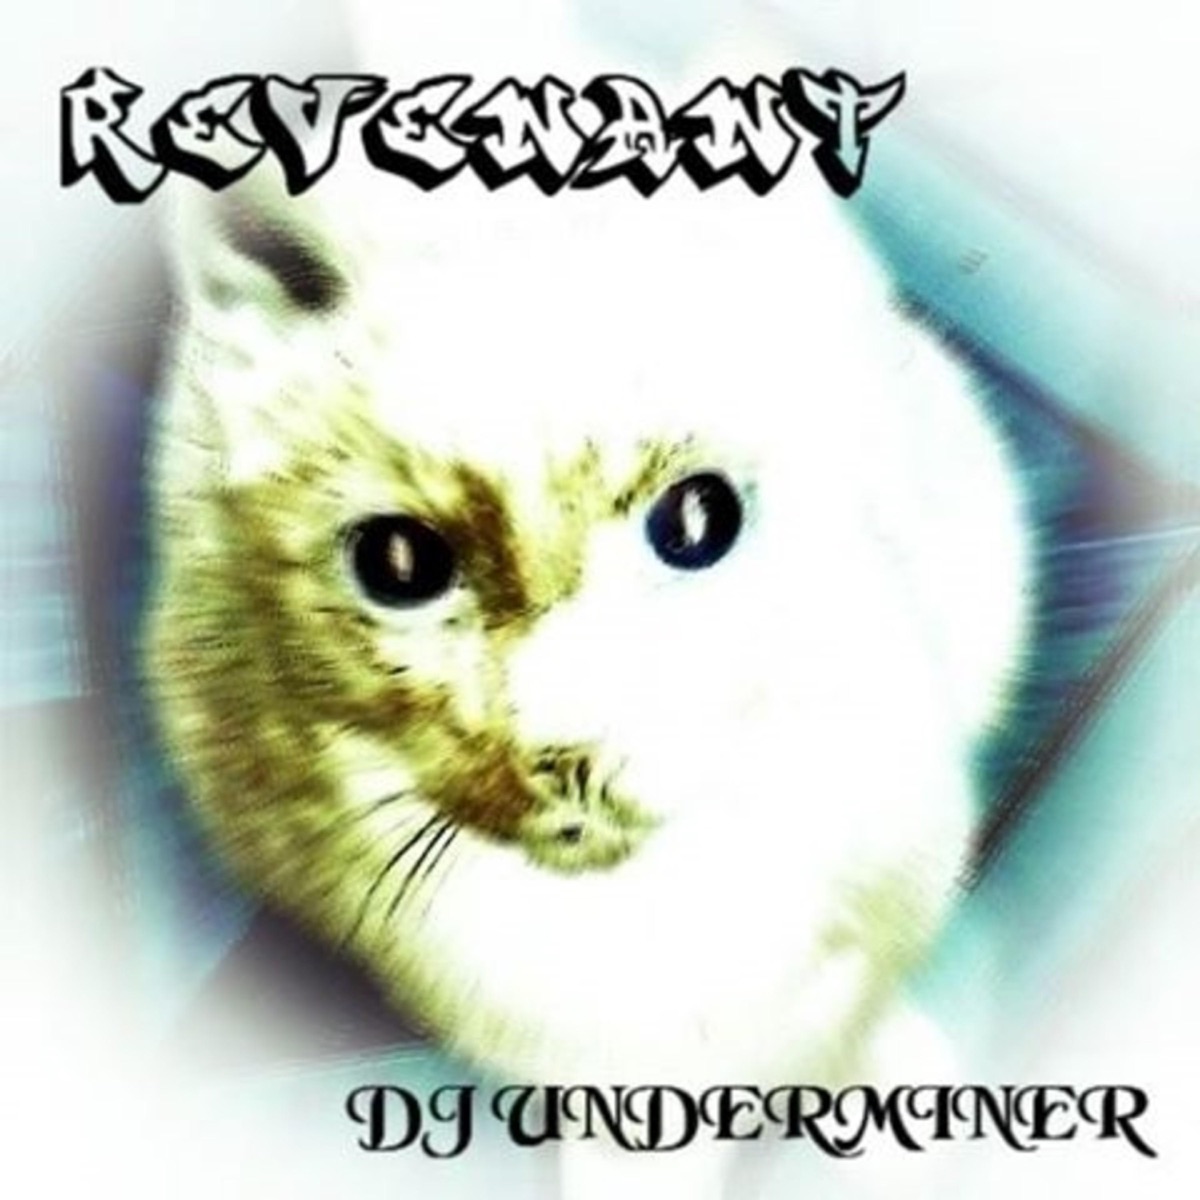 Revenant (Deluxe Edition) by DJ Underminer on Apple Music